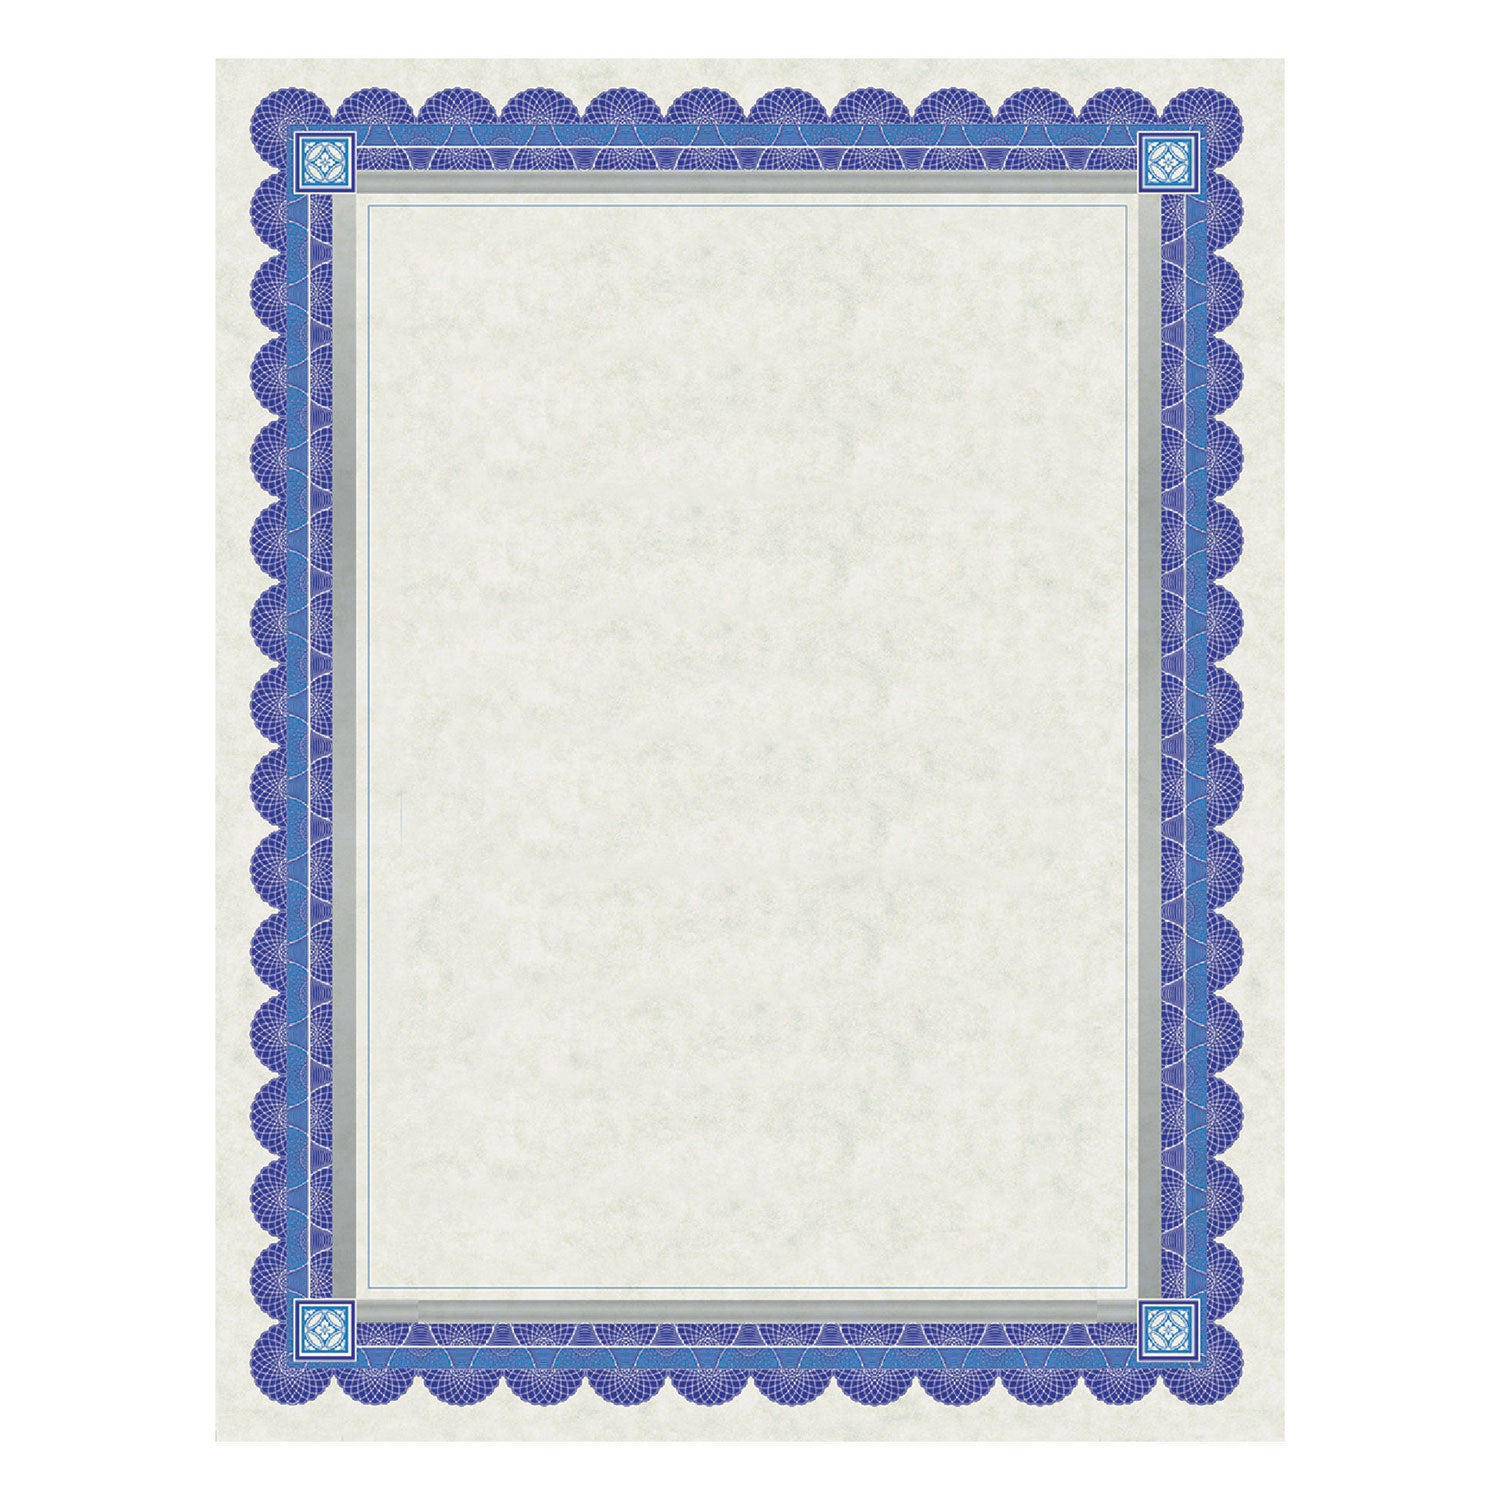 Parchment Certificates, Academic, 8.5 x 11, Ivory with Blue/Silver Foil Border, 15/Pack - 